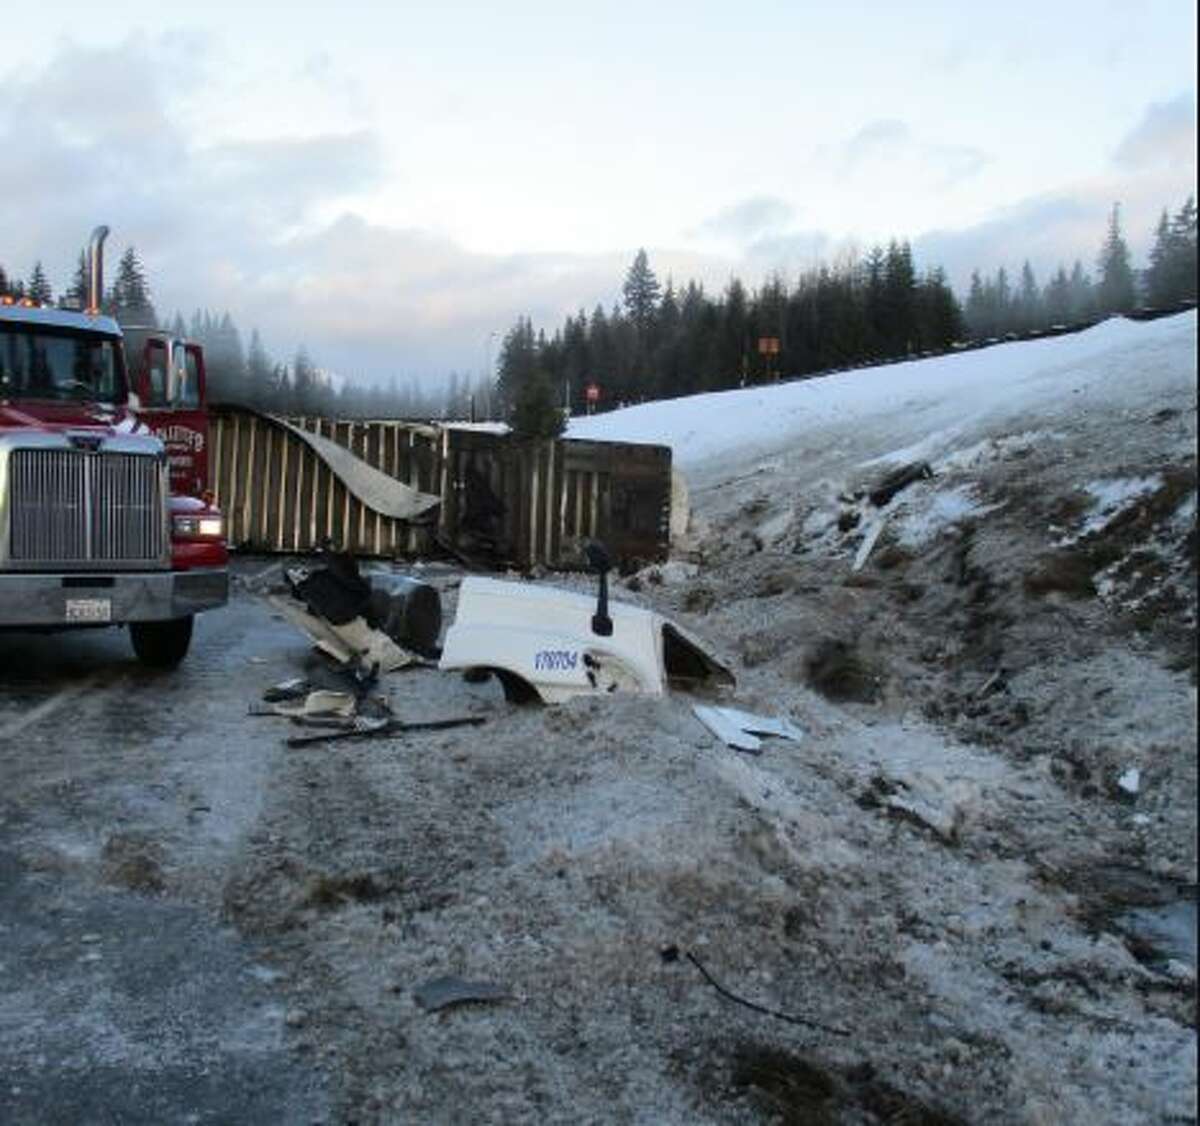 Photos of a crash scene on Interstate 90 about eight miles east of Snoqualmie Summit and nine miles west of Easton. At least one person died in the crash and an investigation was ongoing.